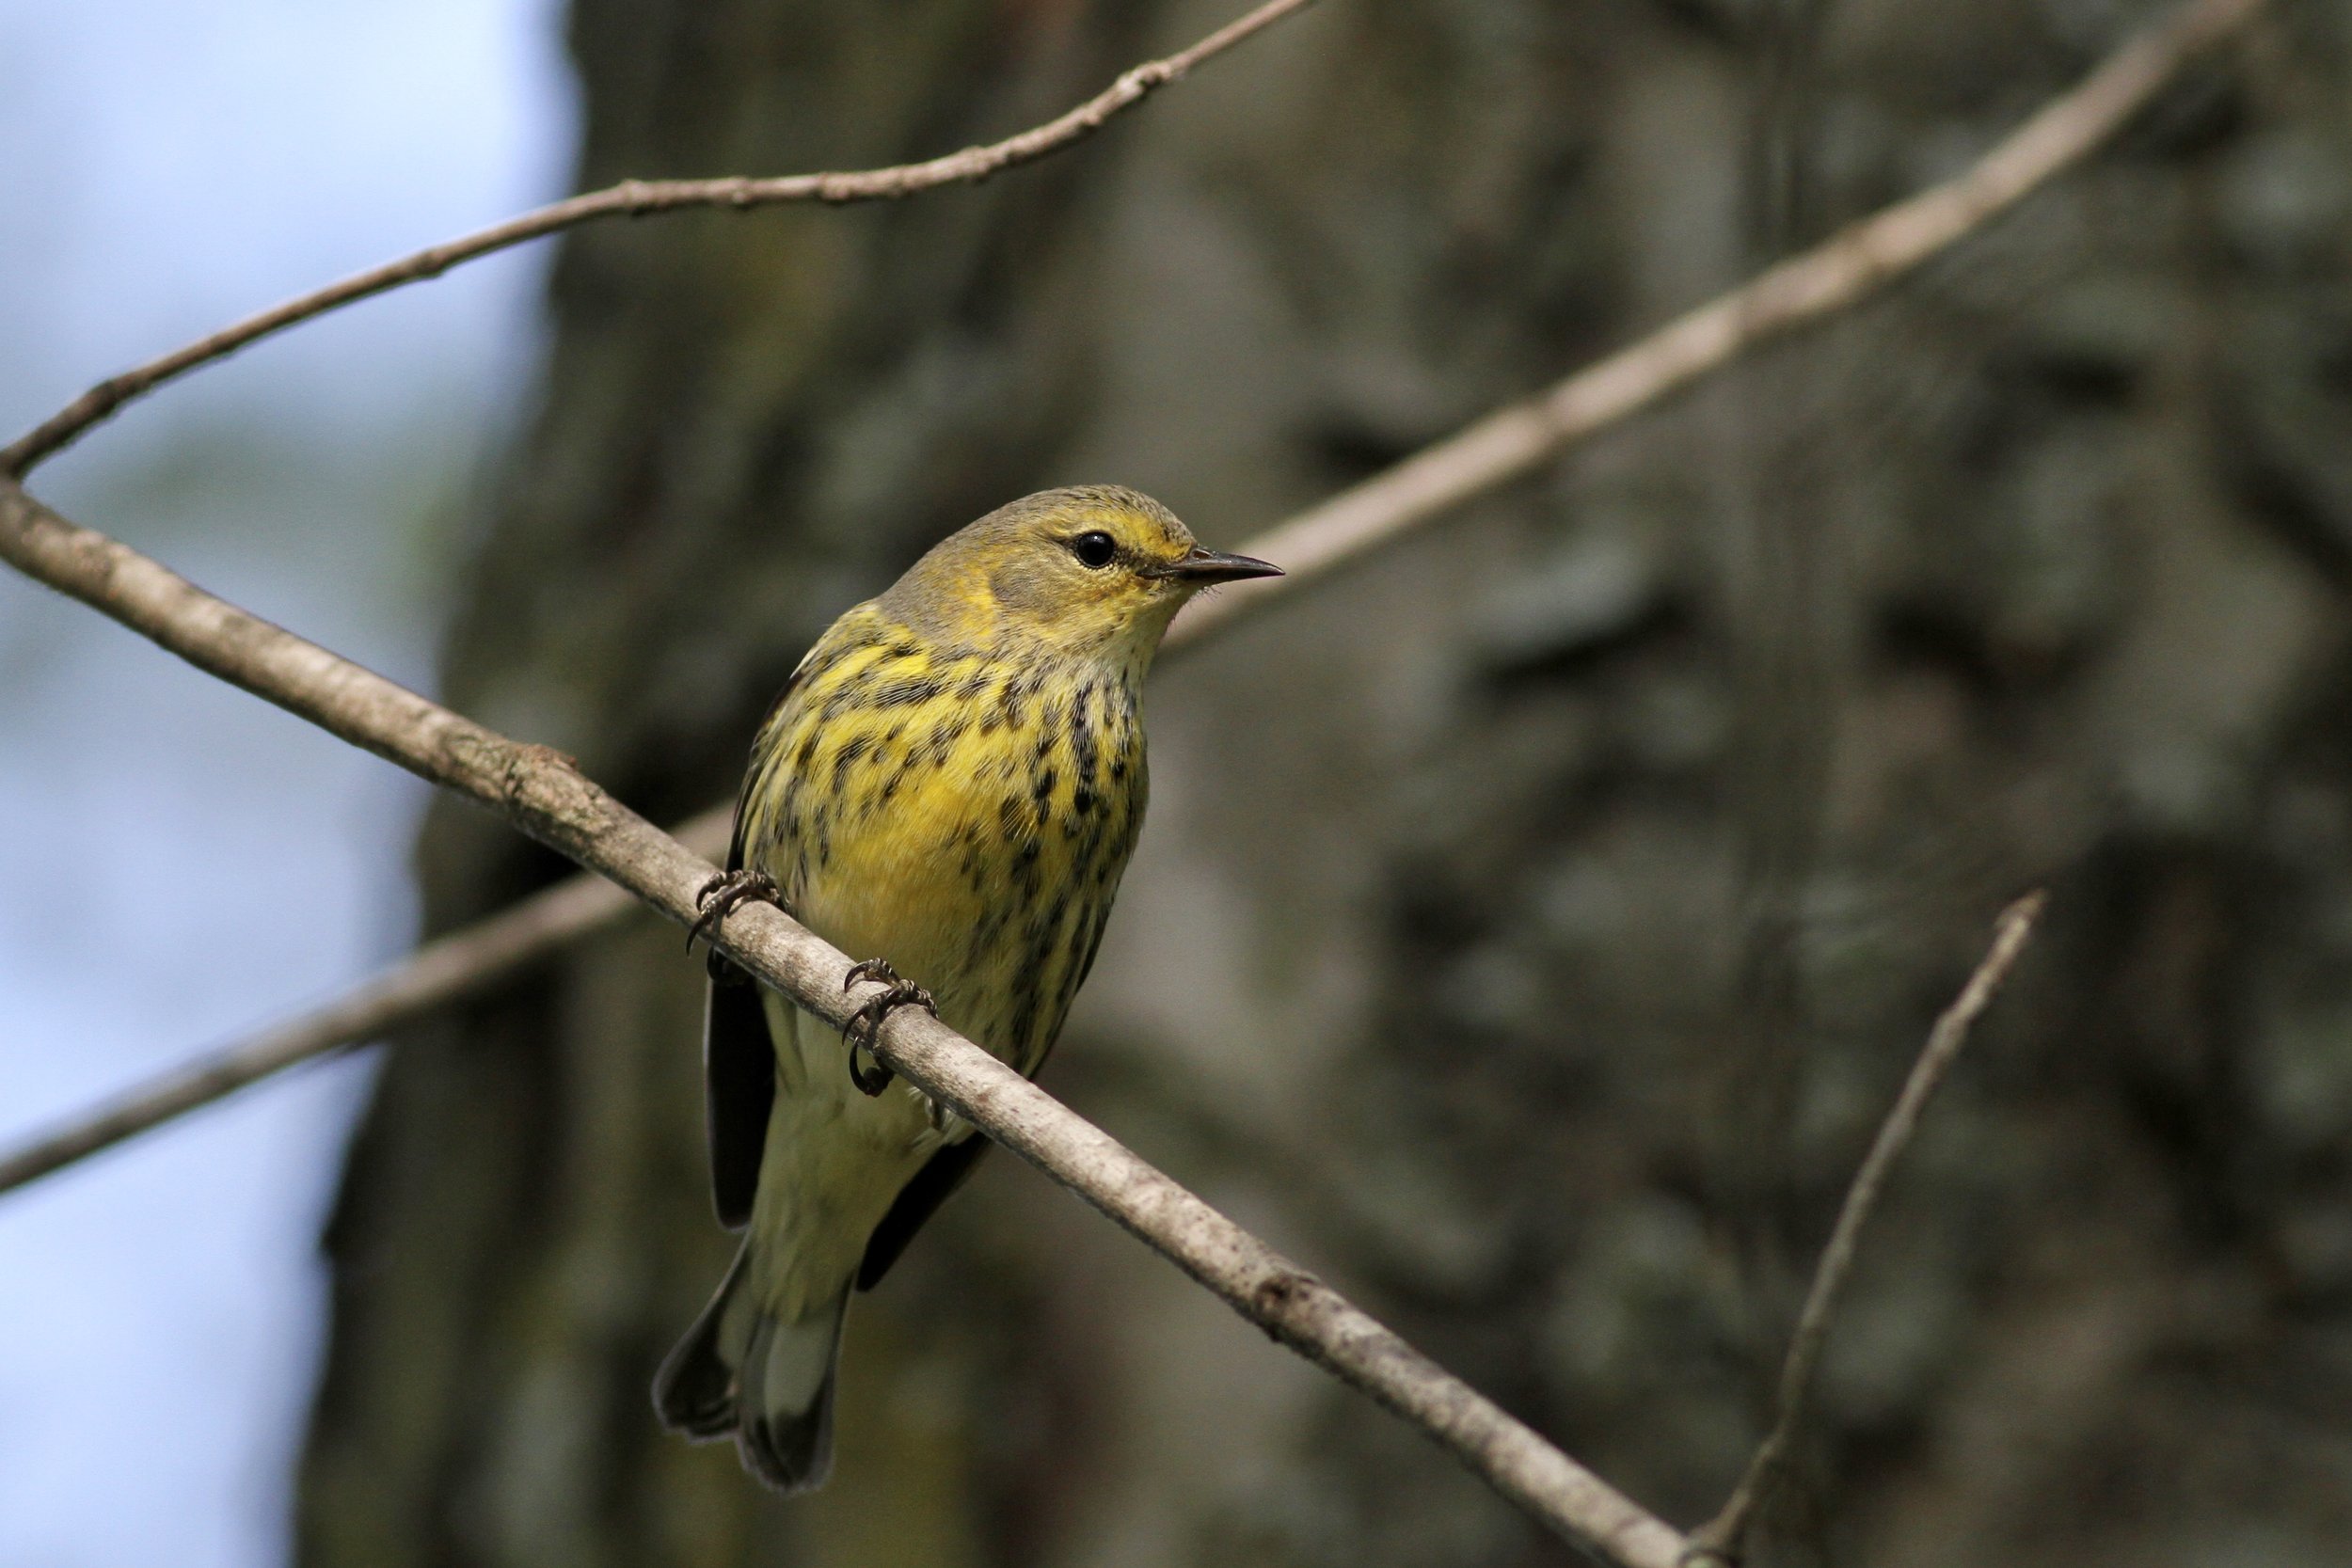 Cape May Warbler is one of many expected migrant warblers